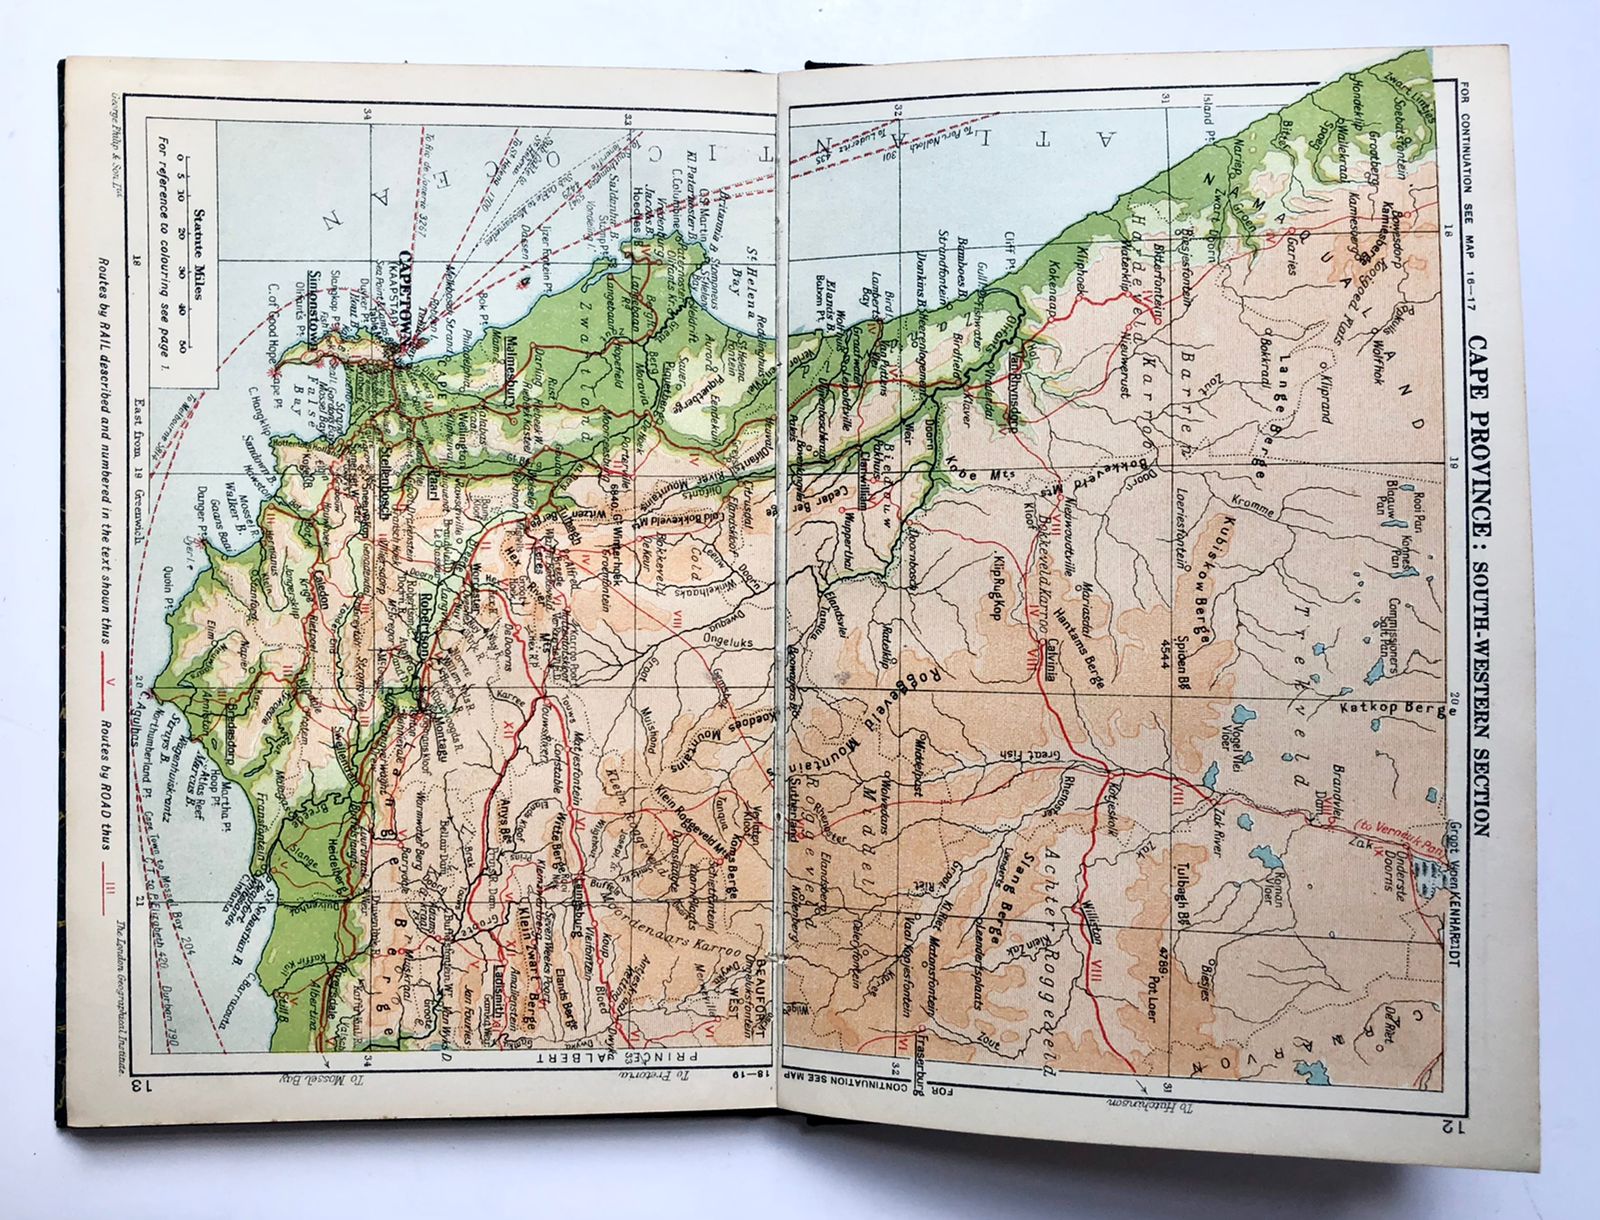 [Afrika, 1931] The South and East African year book & guide, atlas and diagrams, thirty-seventh edition, Sampson low, Marston & Co, London, 1931, 64 pp.